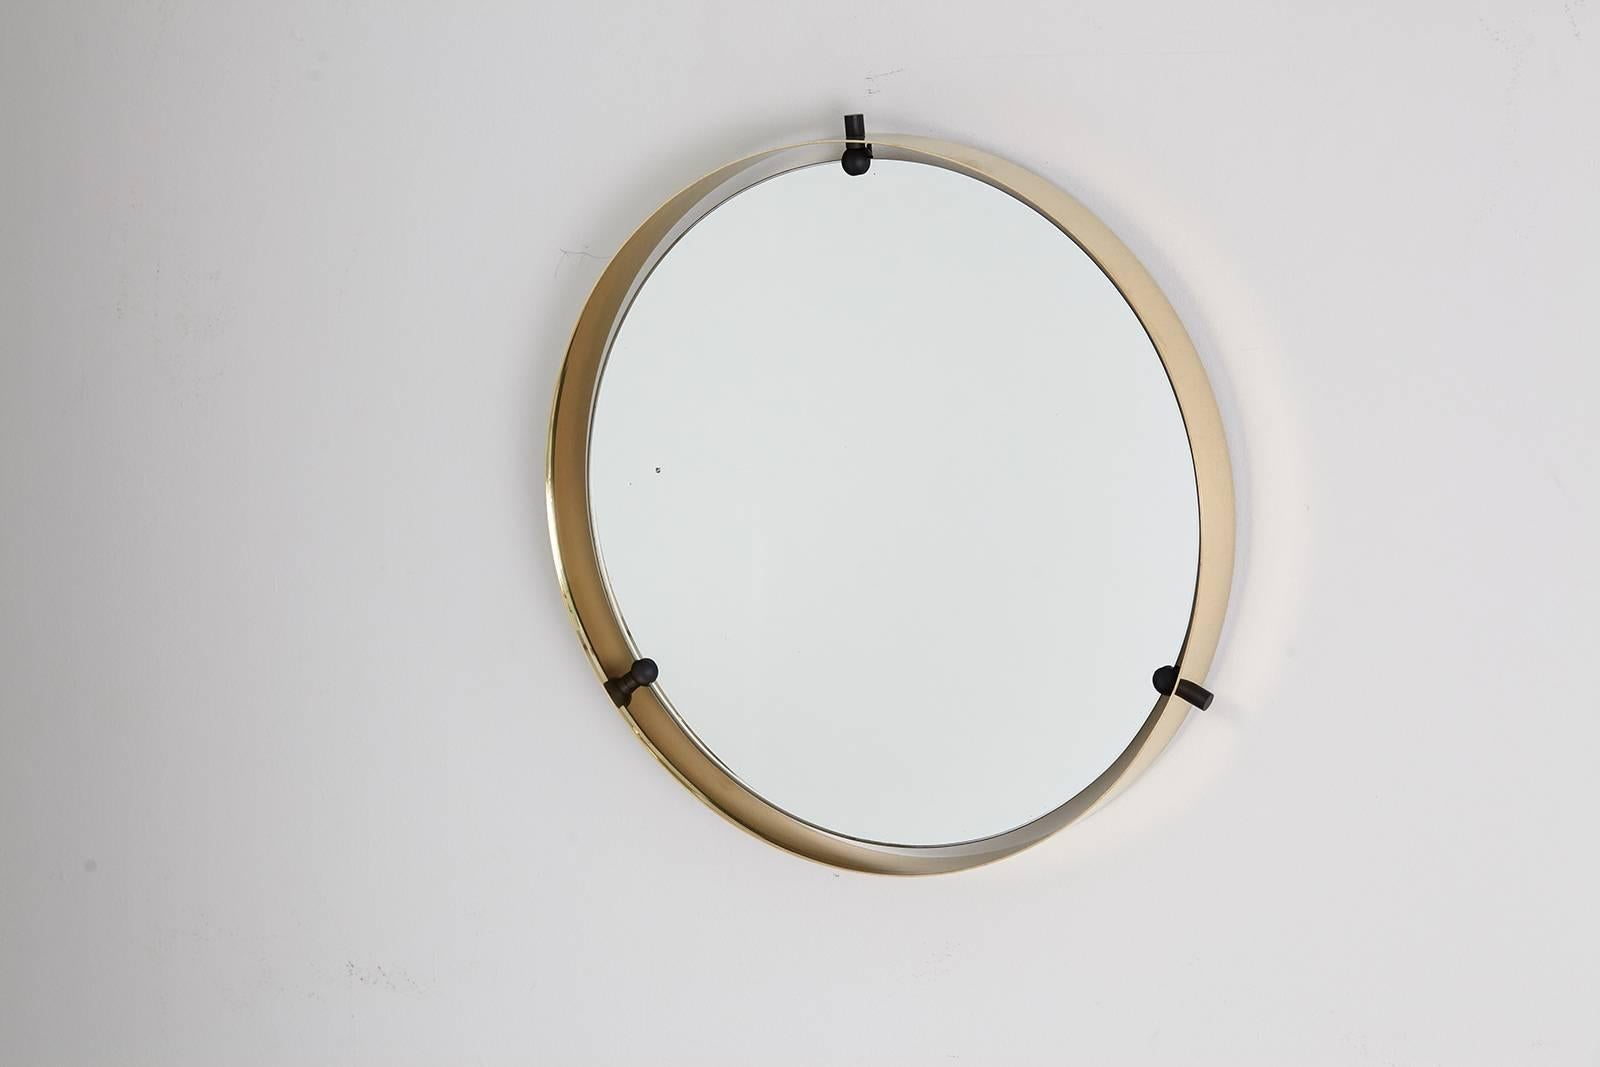 Gorgeous Italian mirror in brass frame suspended by three black iron hardware.

Measures: Mirror itself measures 18.75